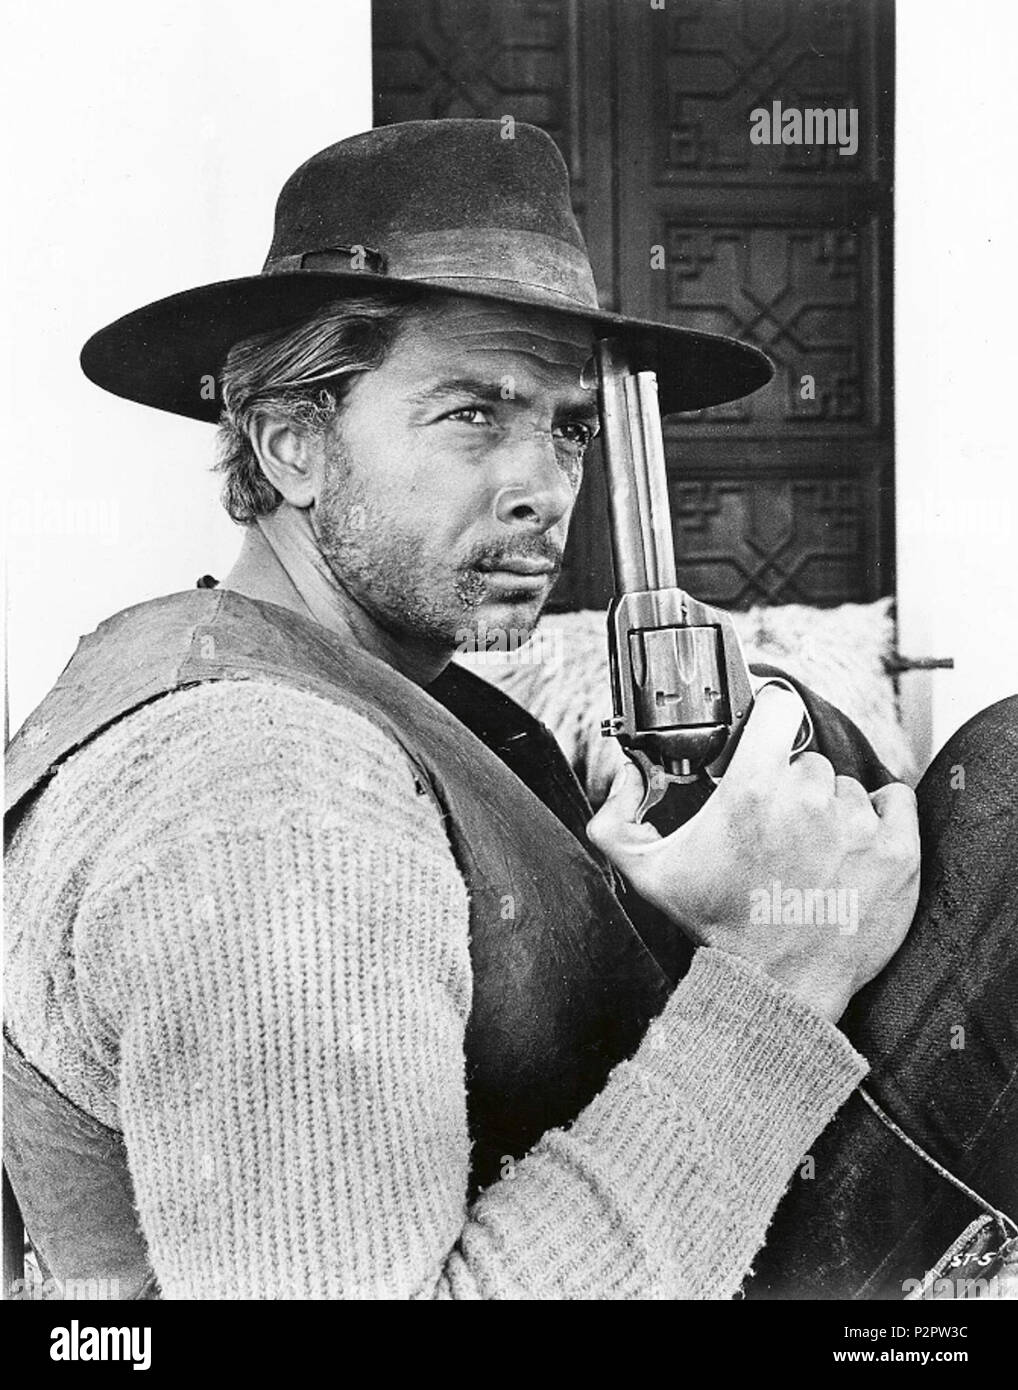 . English: Production photograph of actor Tony Anthony as 'The Stranger' in the Spaghetti Western 'A Stranger in Town' (1967). 1966. Primex Italiana, Taka Productions 87 Tony Anthony (actor) Stock Photo